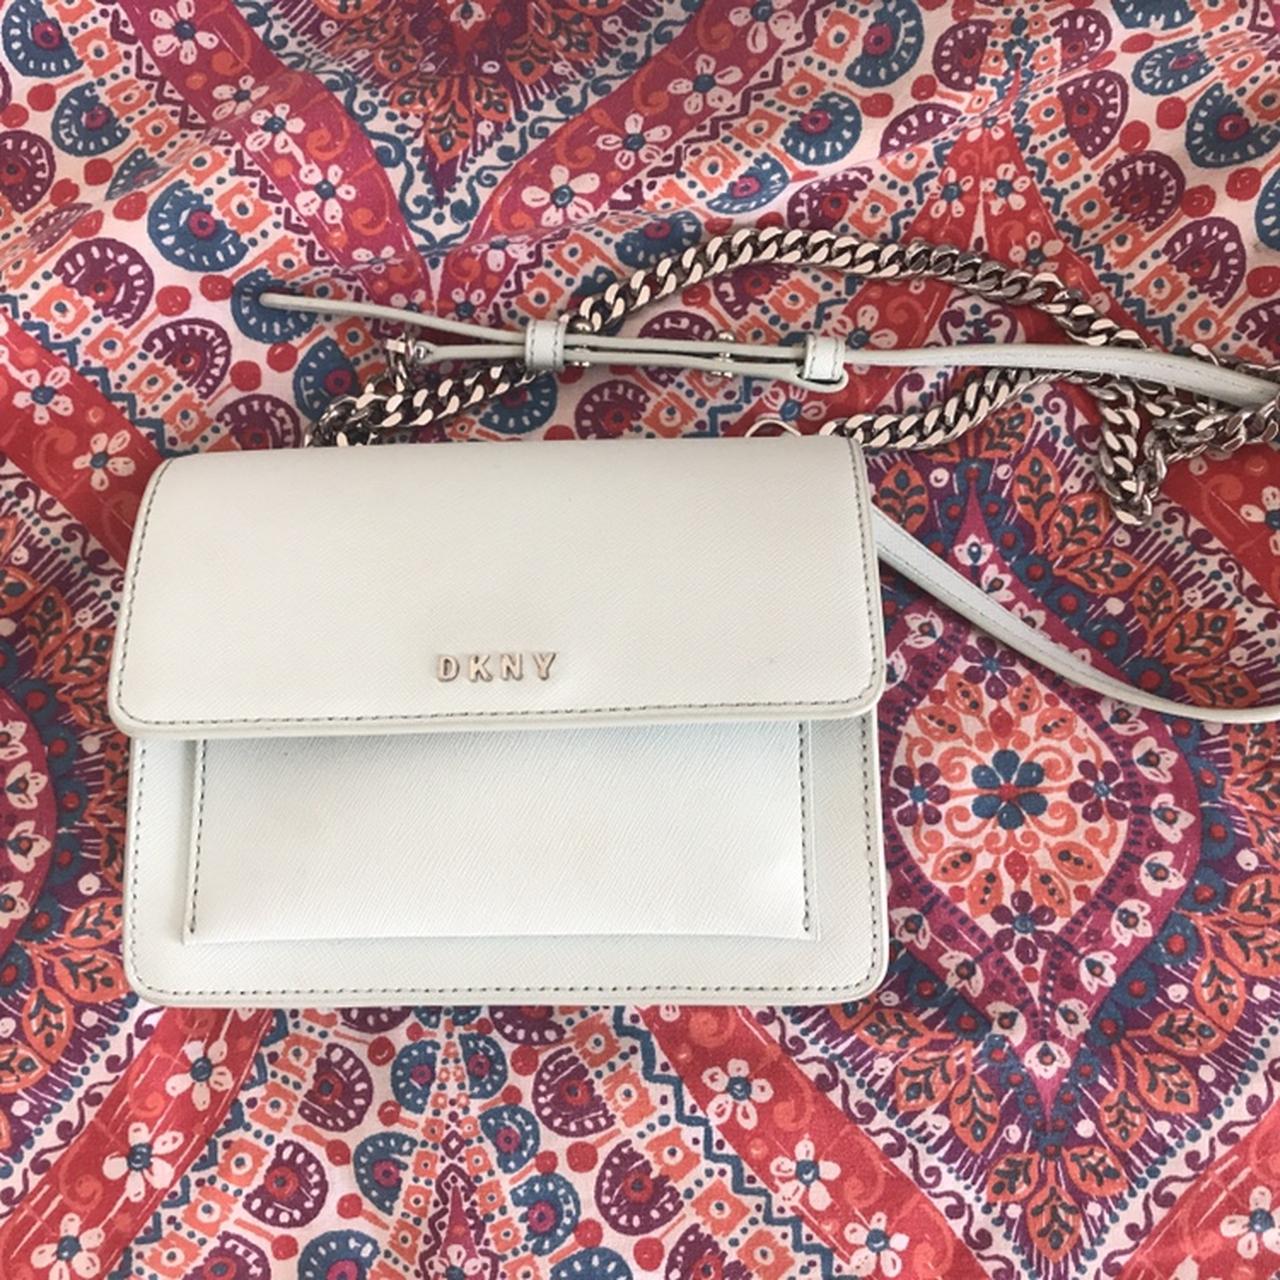 DKNY small chain bag in Mint Green Saffiano Leather - Depop